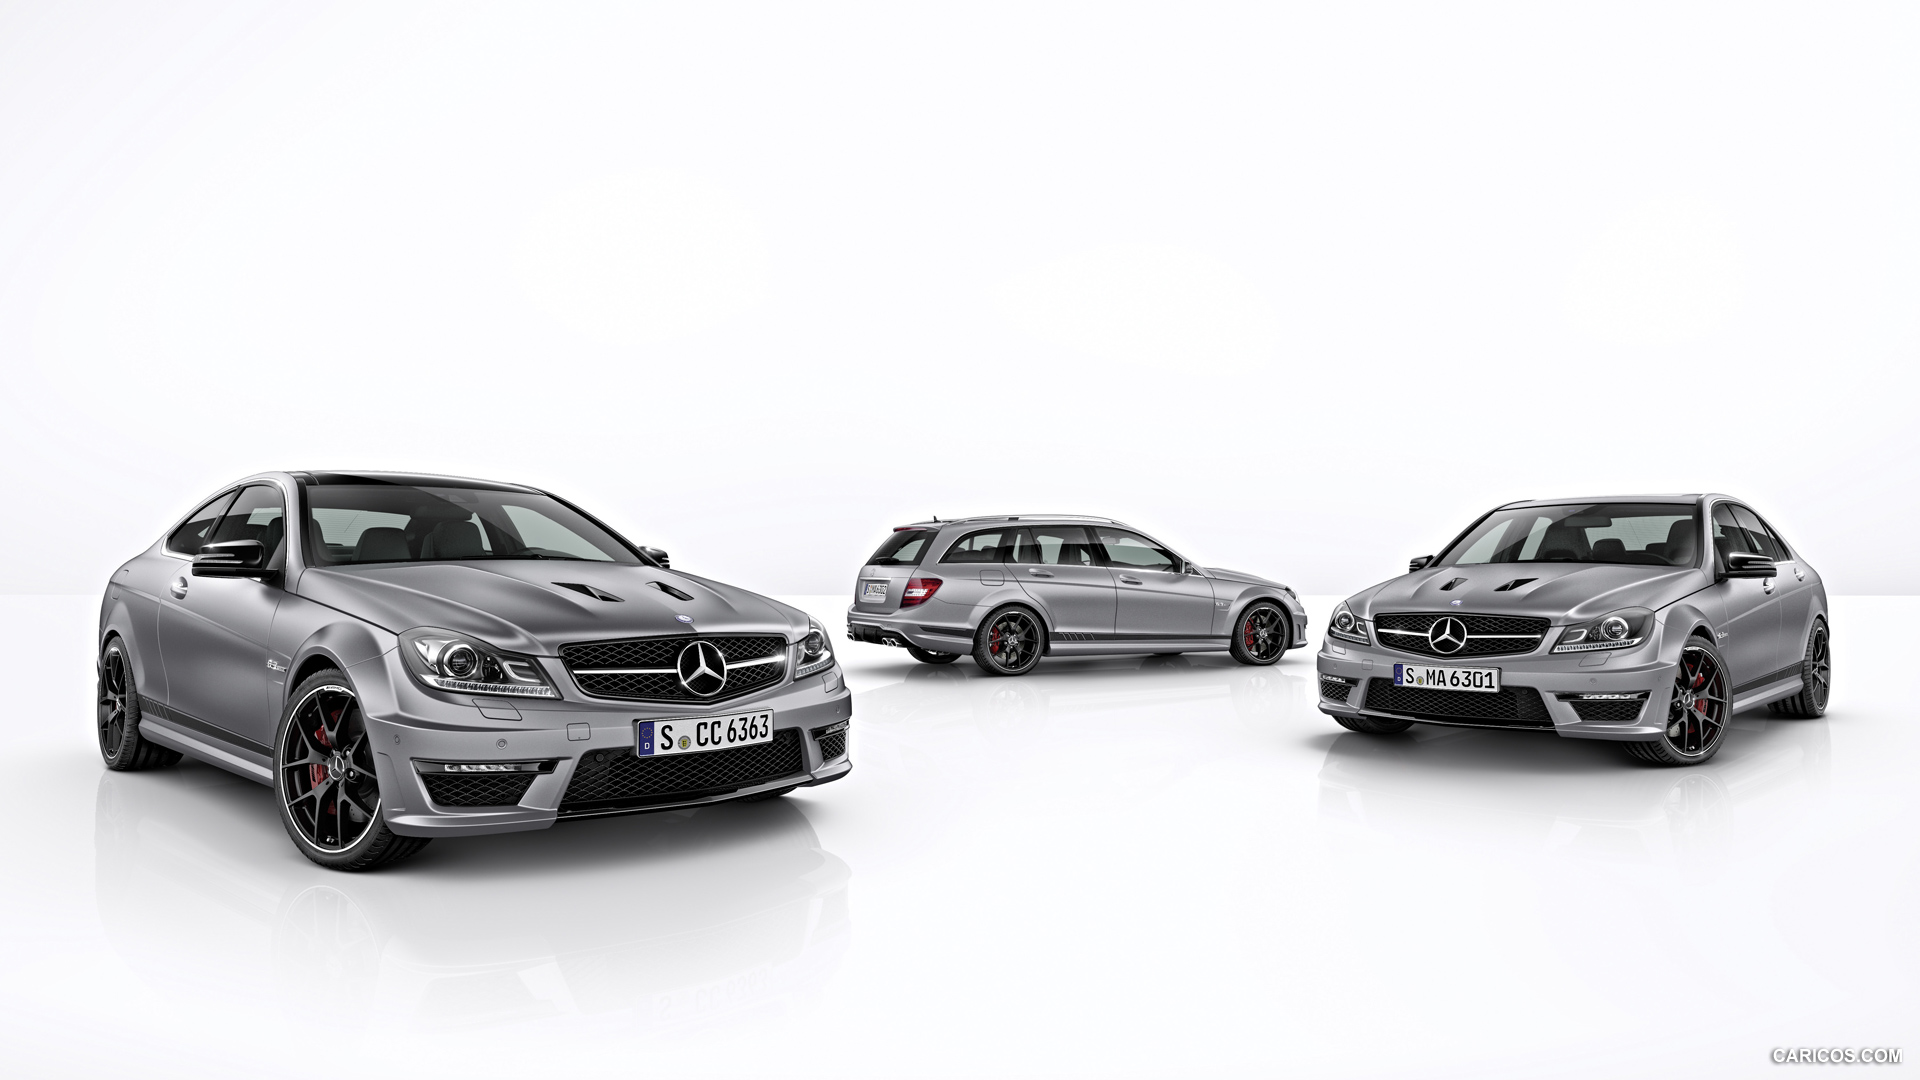 Mercedes-Benz C 63 AMG "Edition 507" (2013) Lineup - , #21 of 21